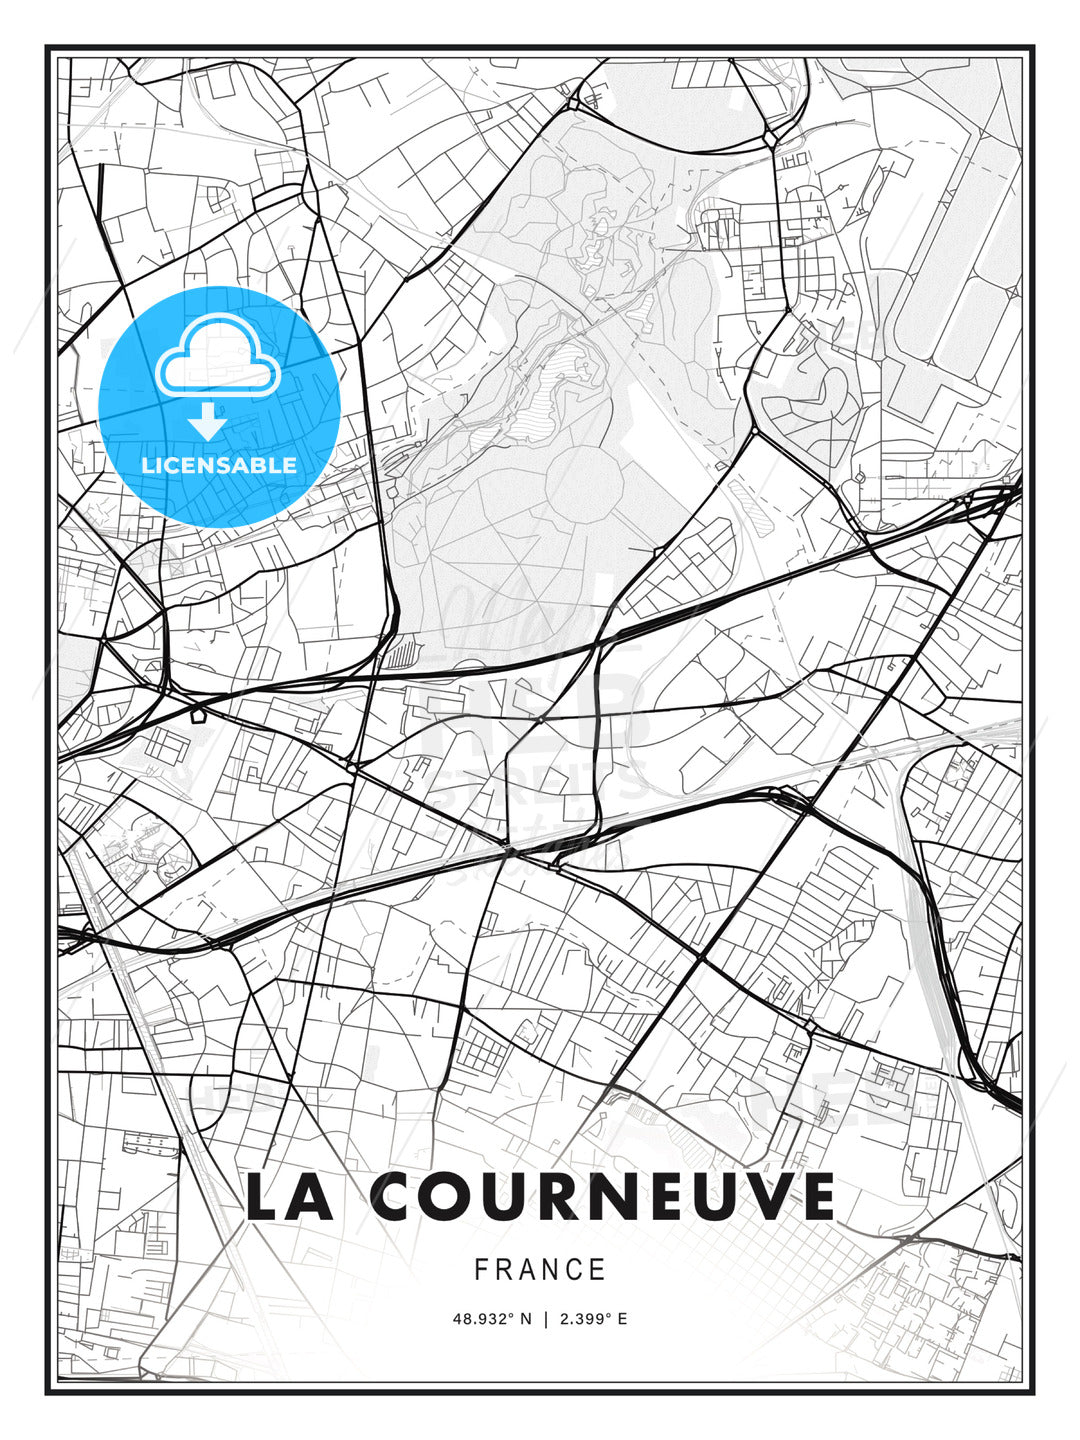 La Courneuve, France, Modern Print Template in Various Formats - HEBSTREITS Sketches